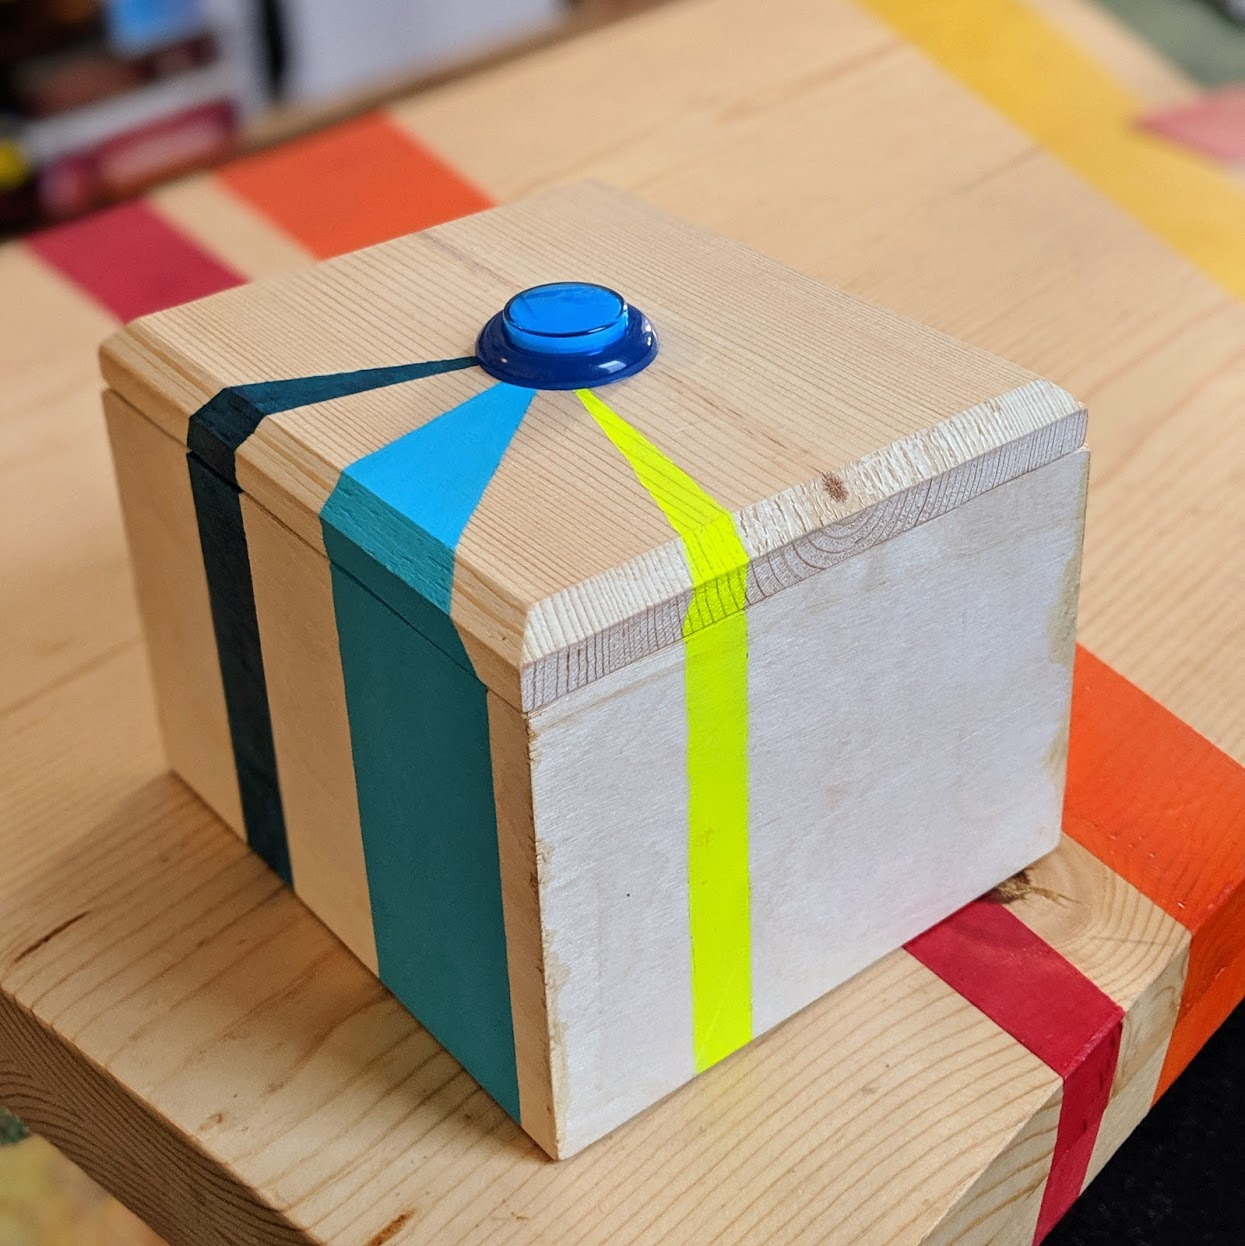 A wooden box with a blue button on the top sits on a table. The box has turquoise, teal, and neon yellow stripes.